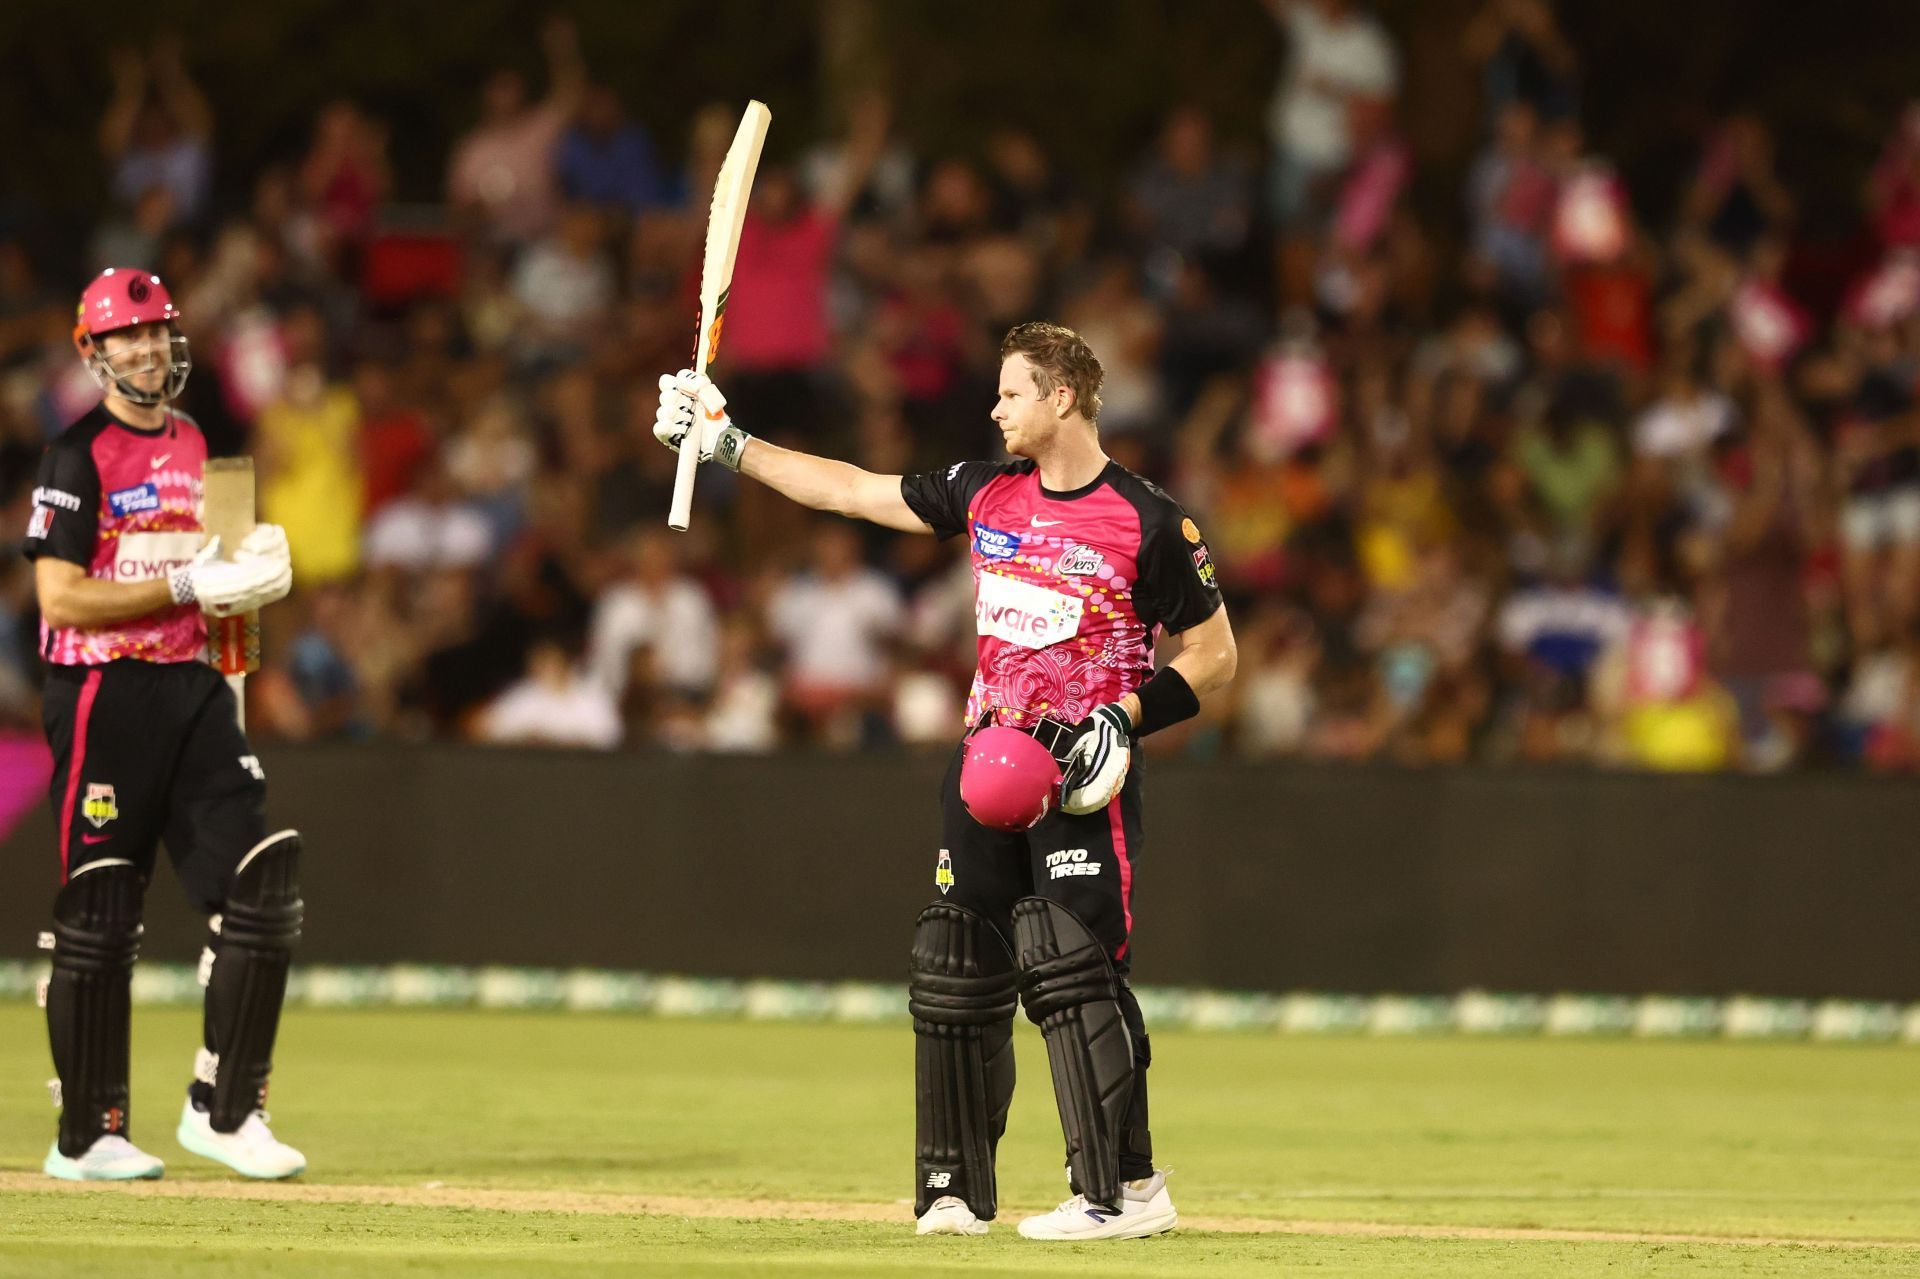 BBL - Sydney Sixers v Adelaide Strikers (Image: Getty)